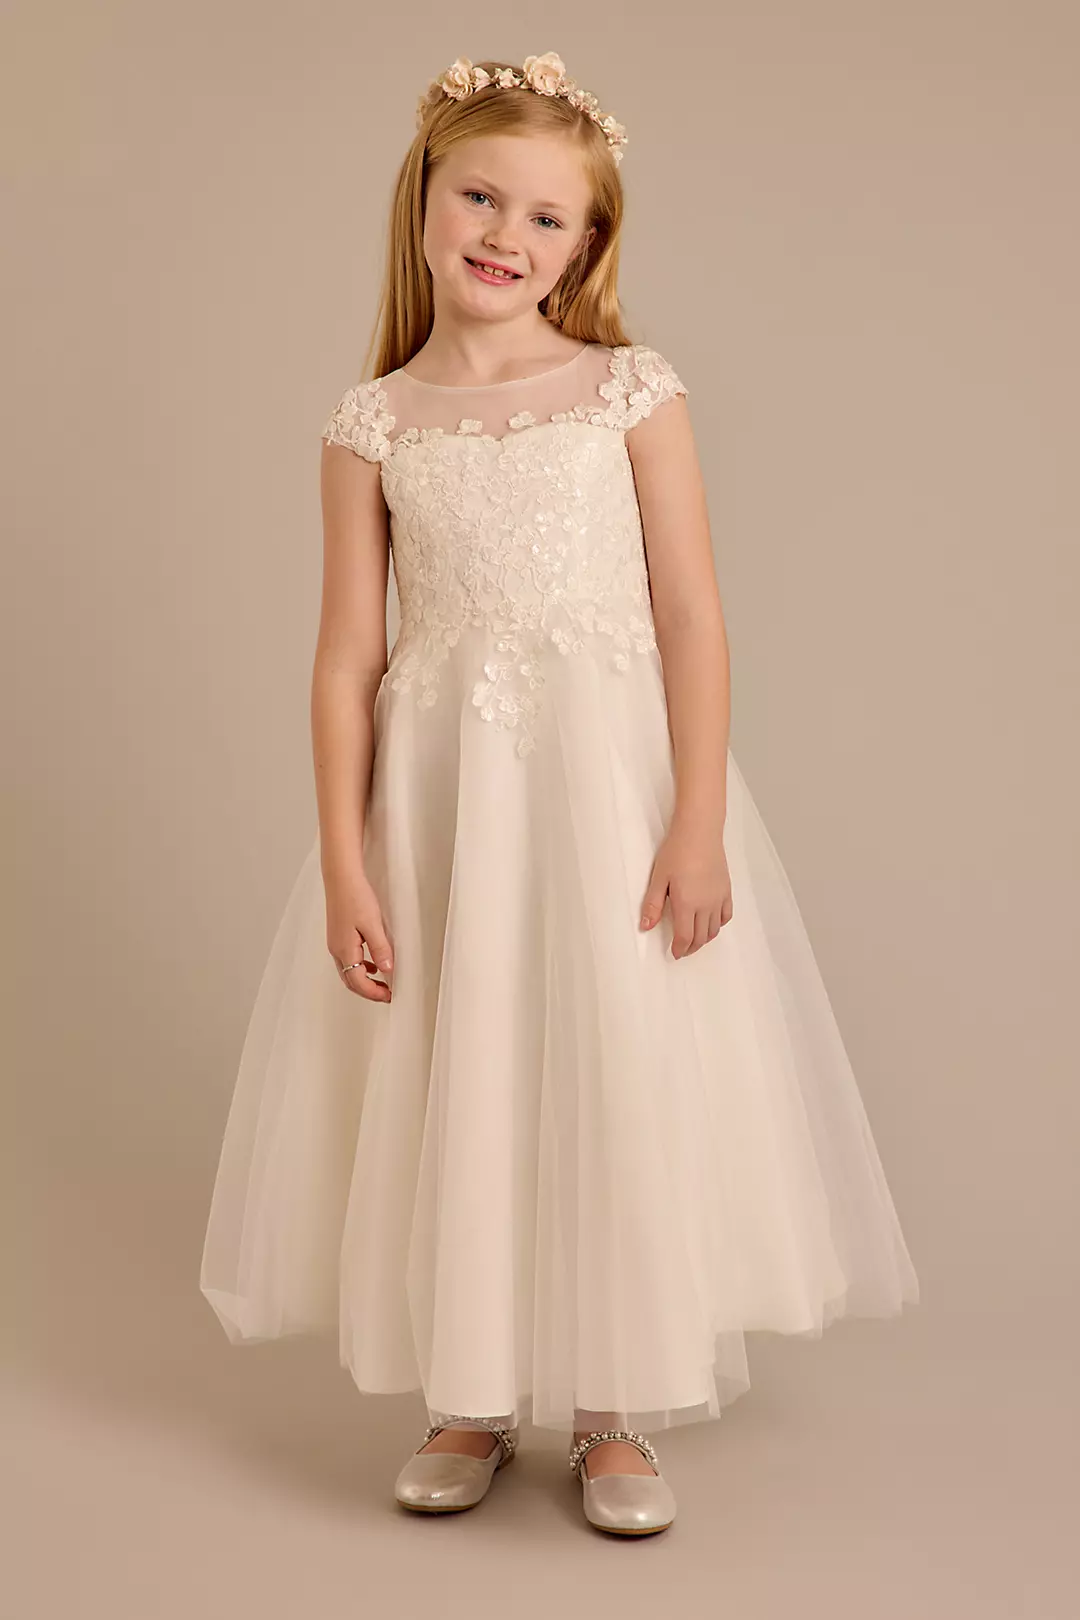 Tulle Flower Girl Dress with Lace Appliques Image